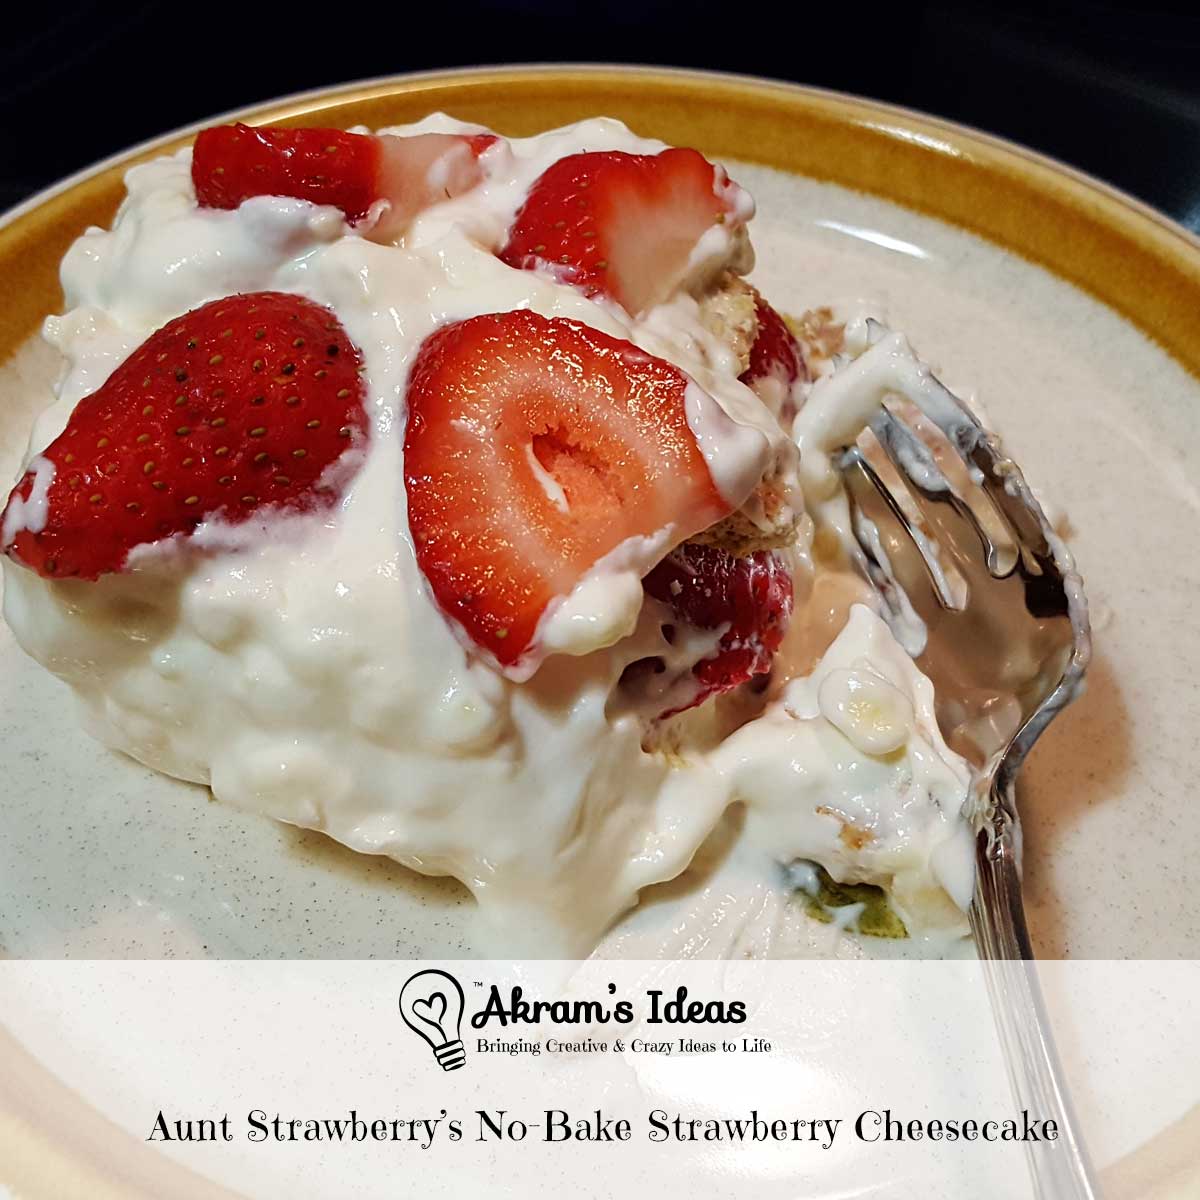 Recipe for an easy no-bake strawberry cheesecake to take to your next get together or potluck.